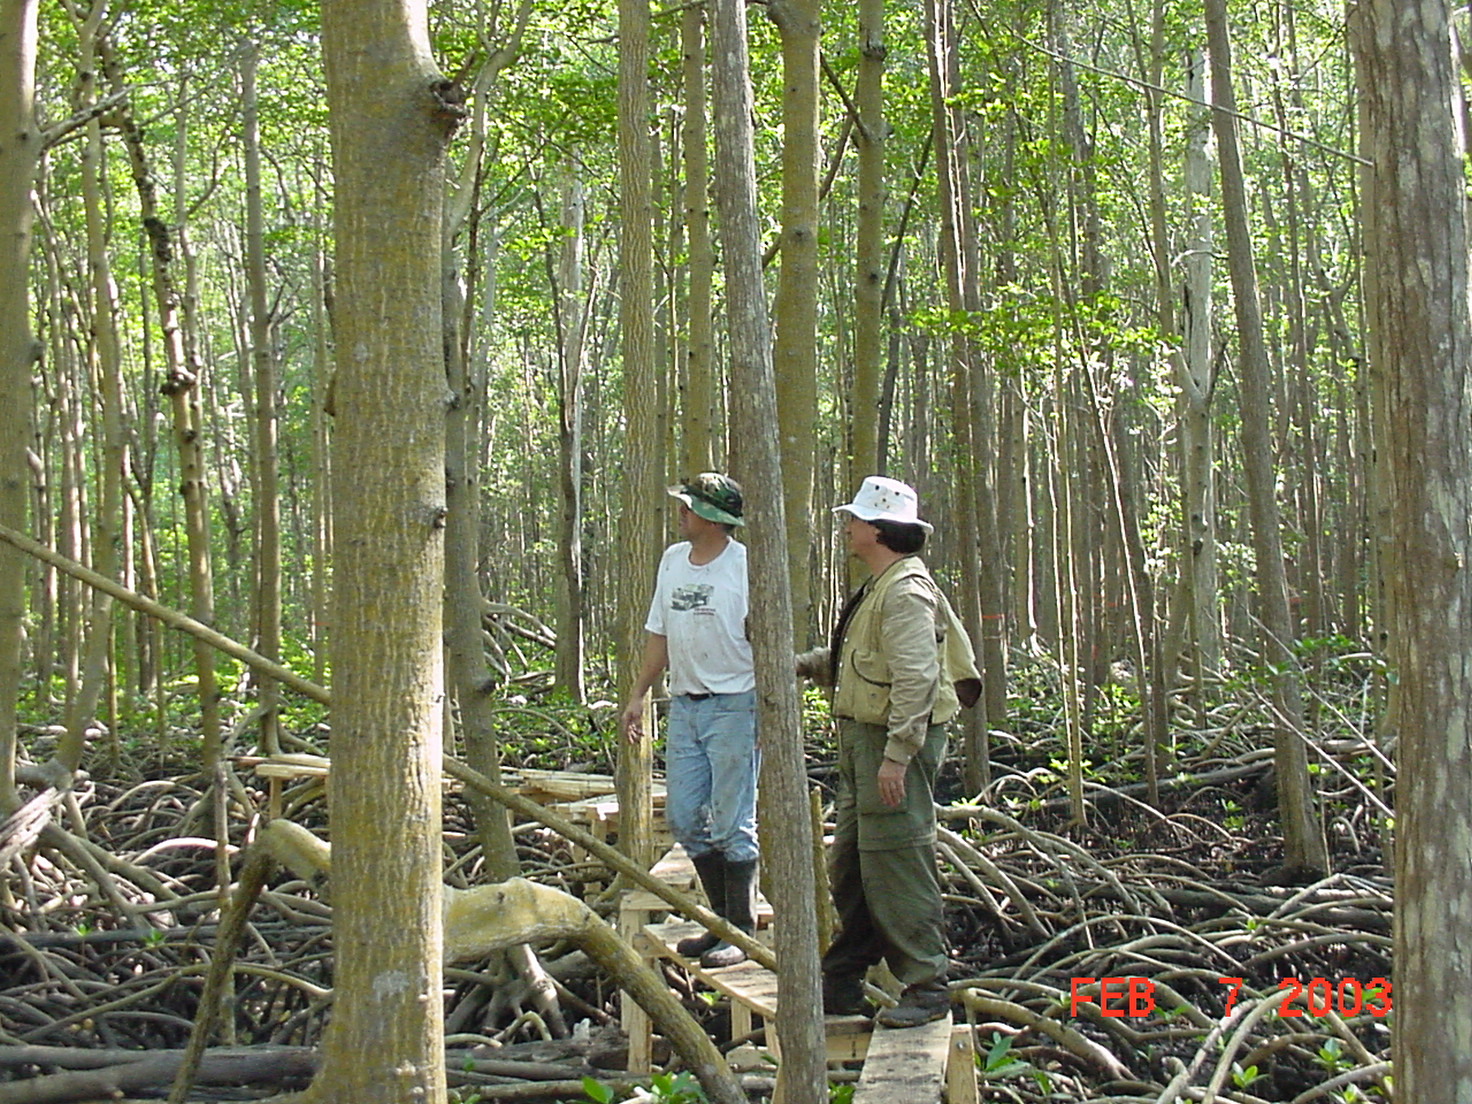 Left to right: Roger Holland and Victor H. Rivera-Monroy. Constructing board walk in mangrove forest at SRS-6 in Shark River Slough